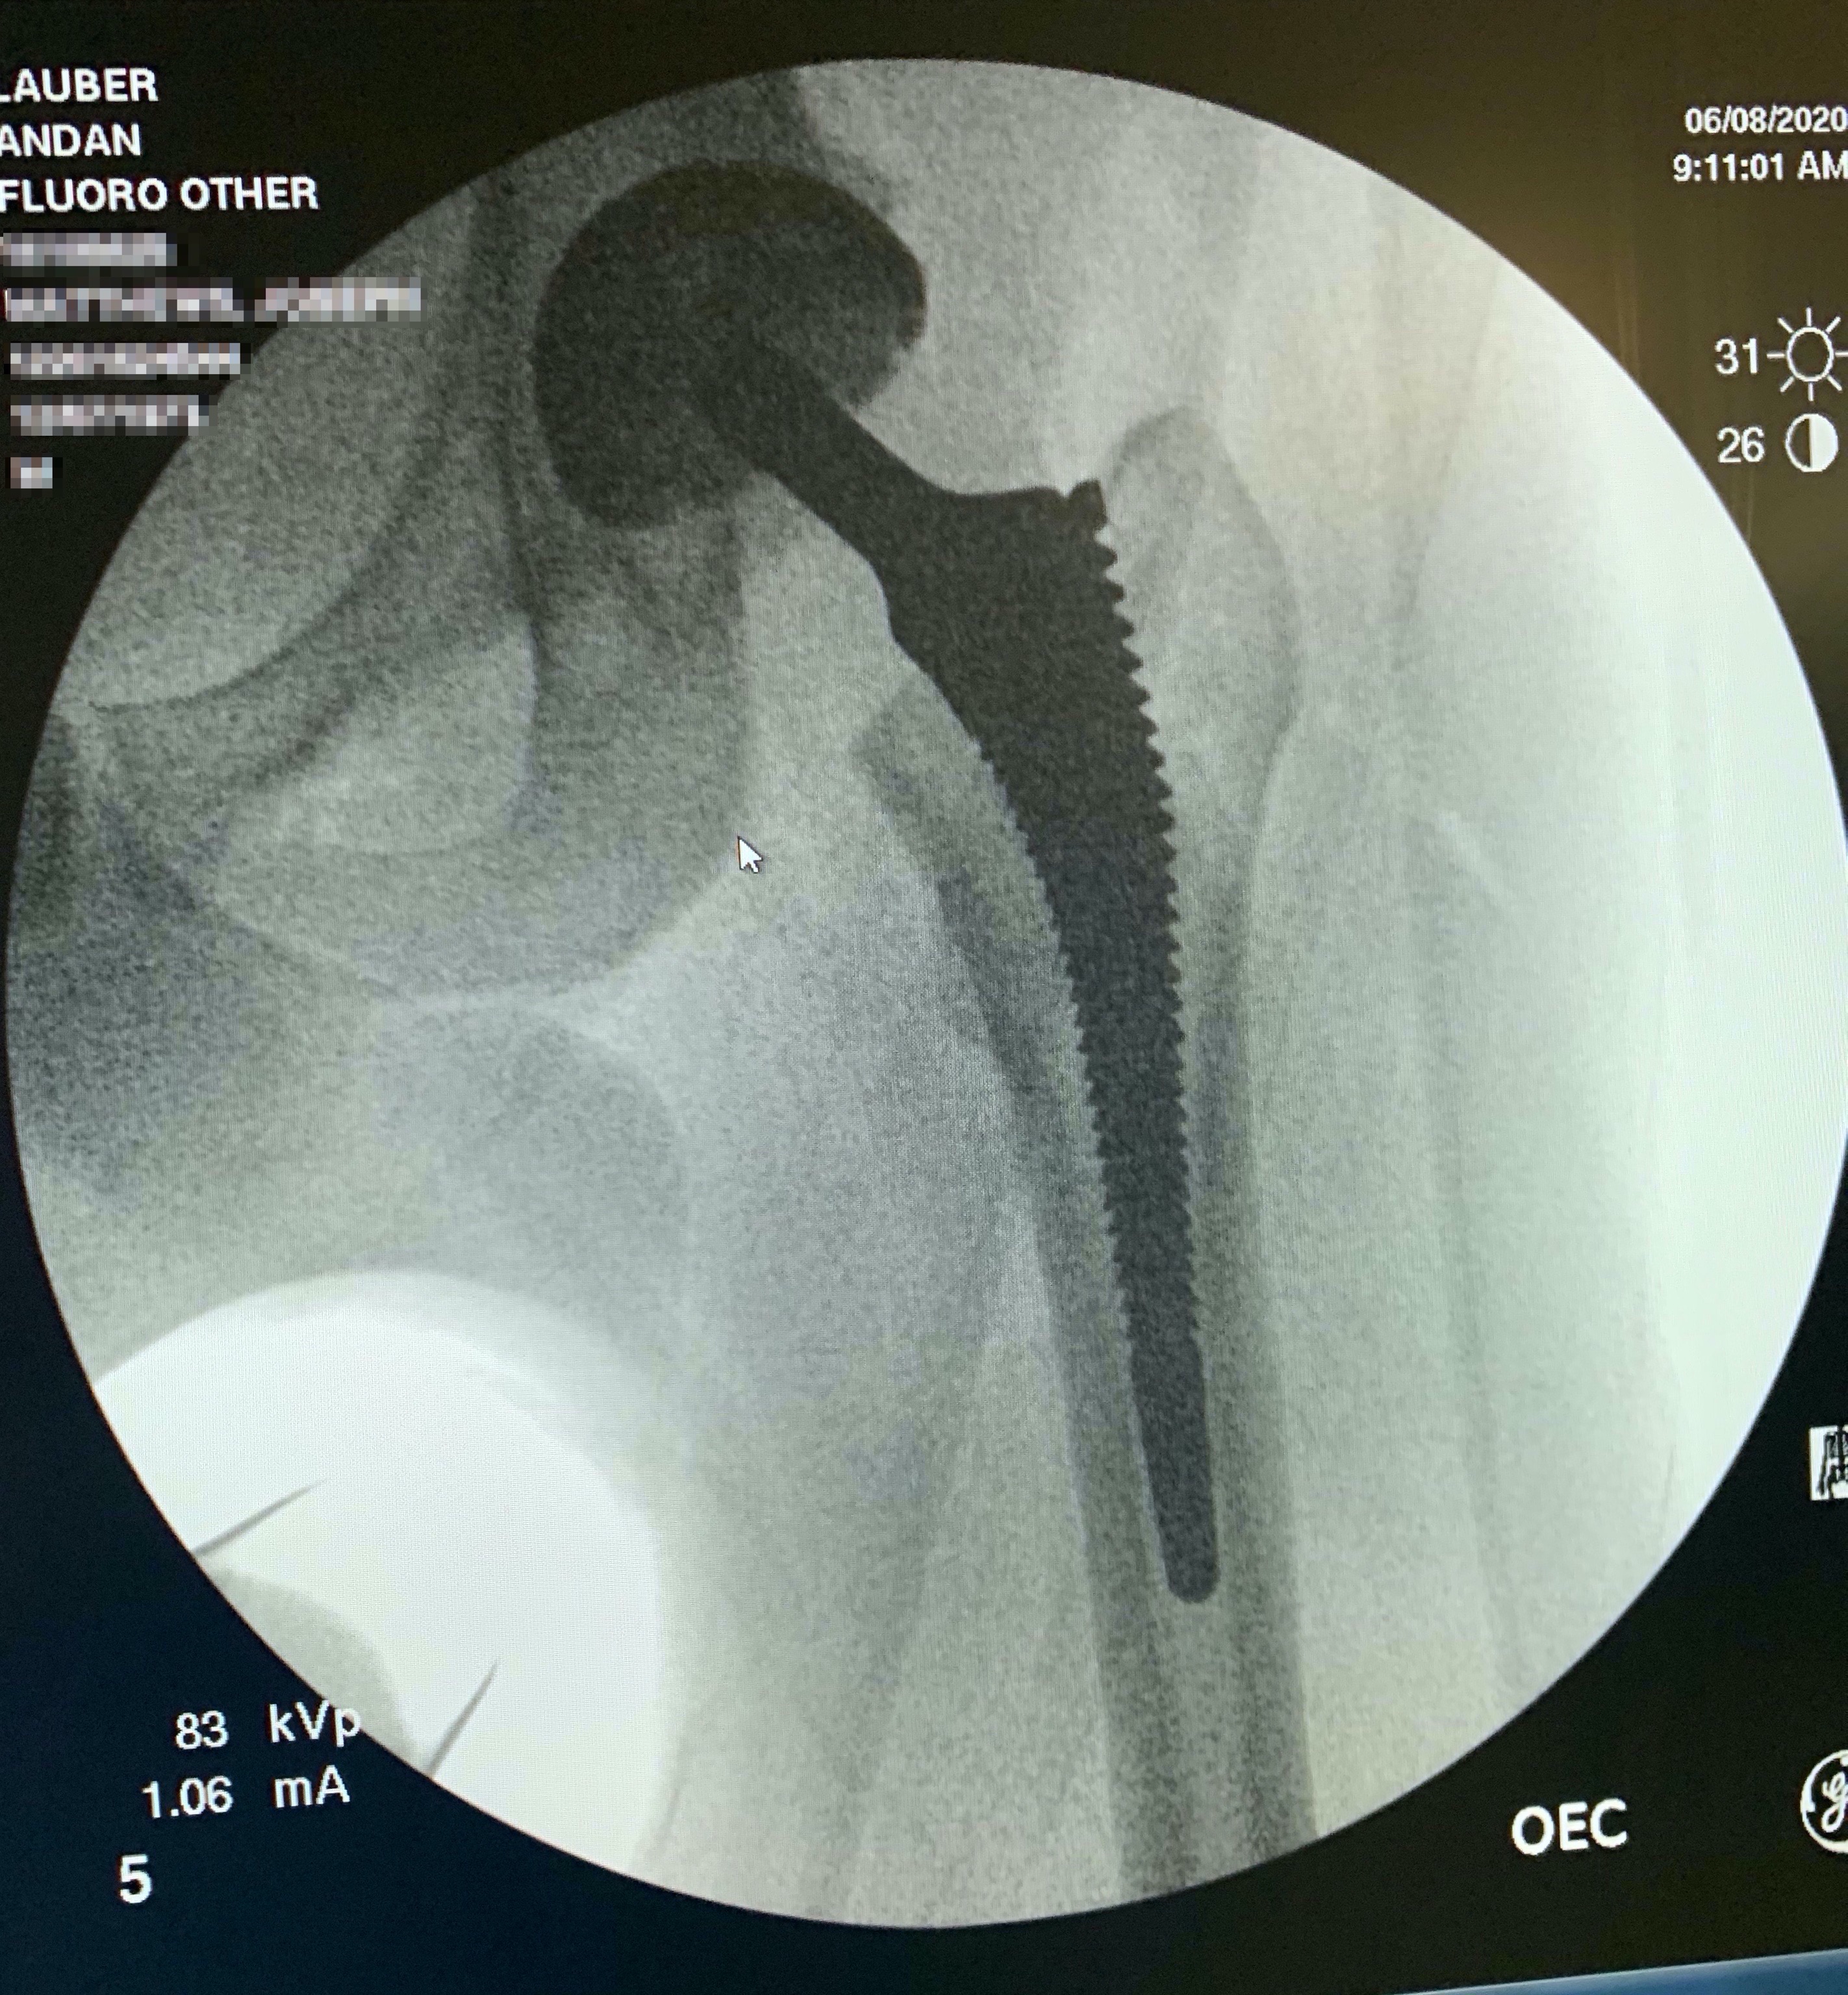 X-ray image of a total joint replacement of the hip showing implanted hardware